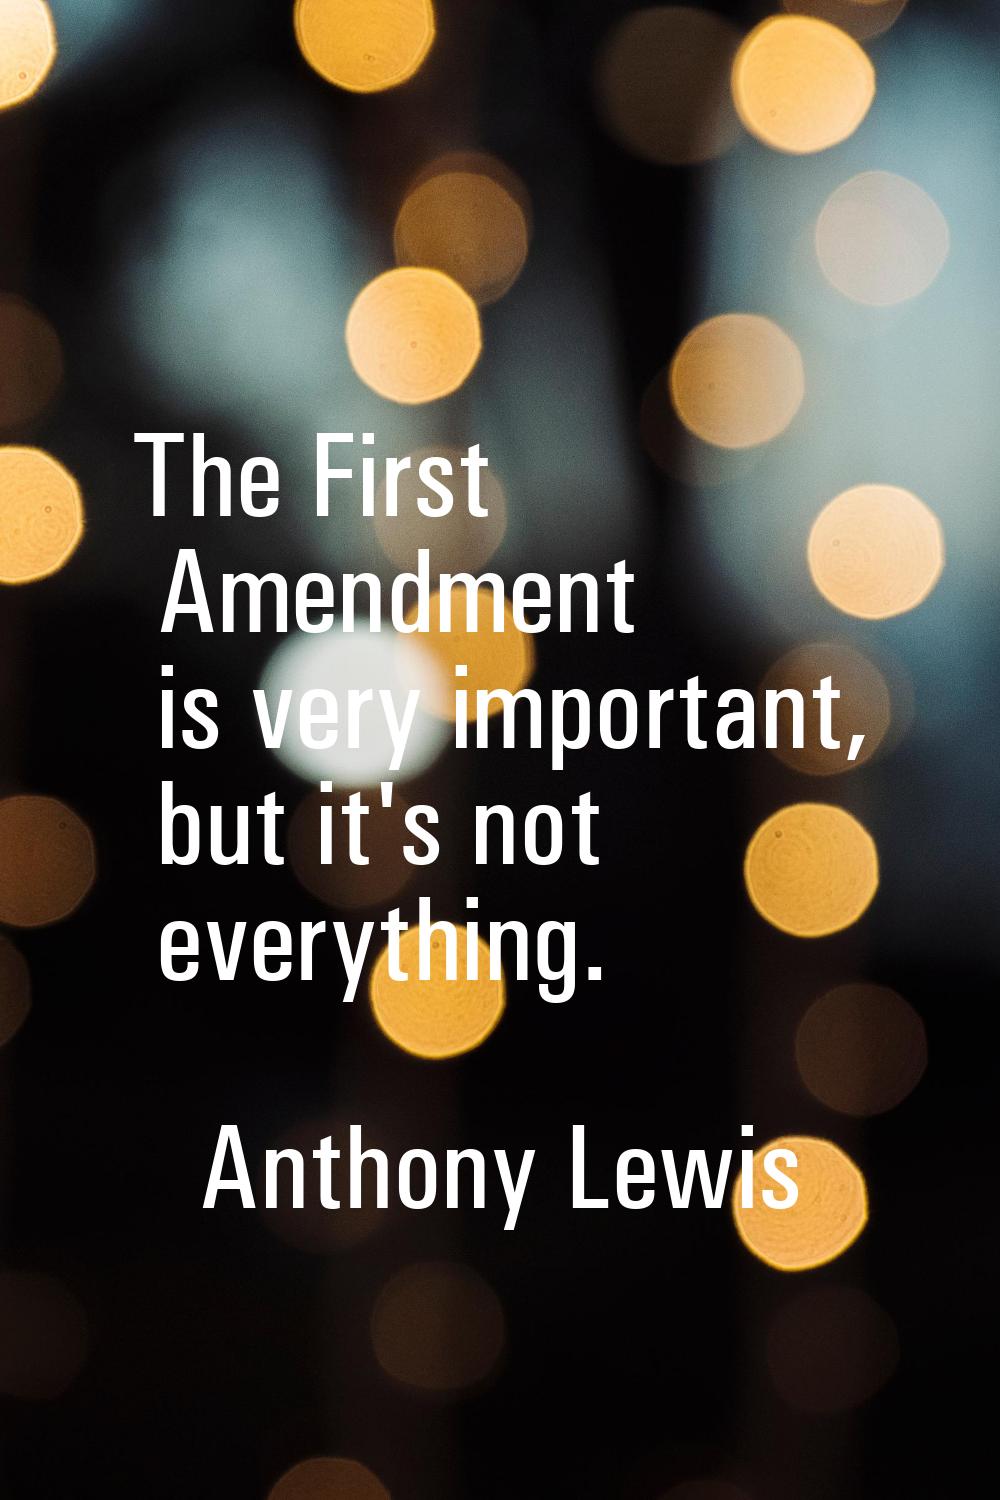 The First Amendment is very important, but it's not everything.